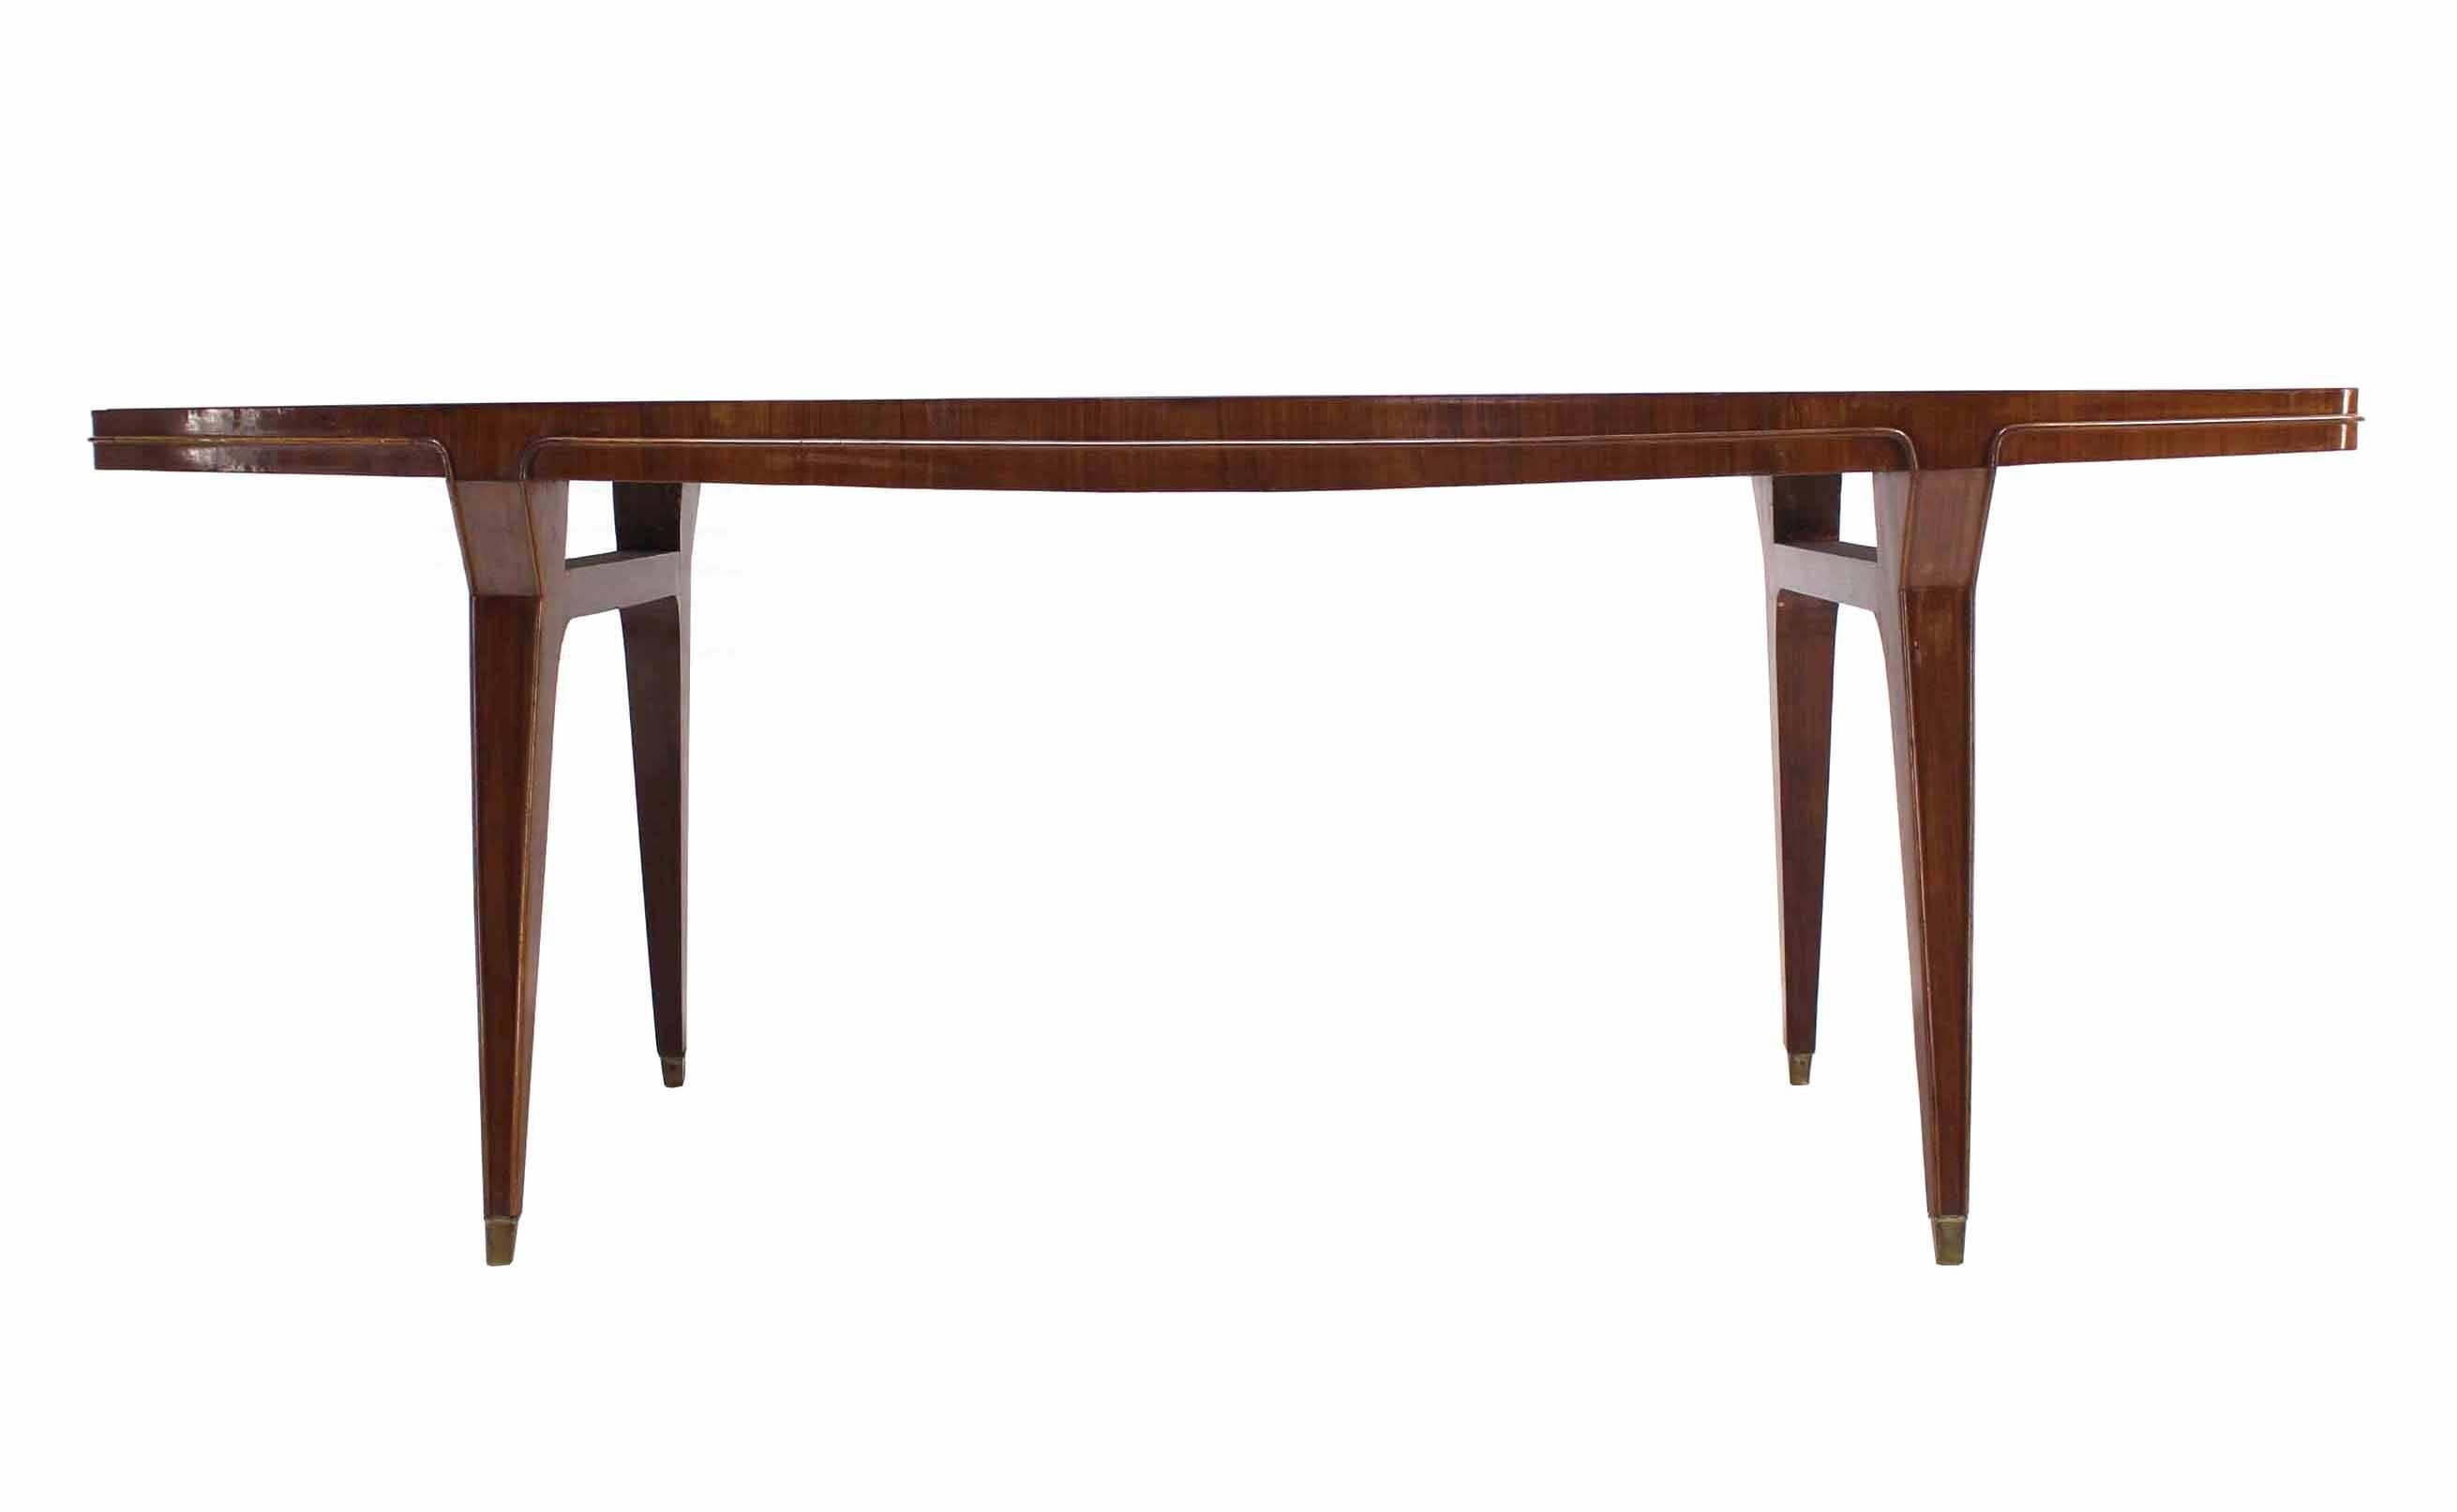 Large Italian Modern Walnut Dining Conference Tapered Legs Table Boat Shape In Excellent Condition For Sale In Rockaway, NJ